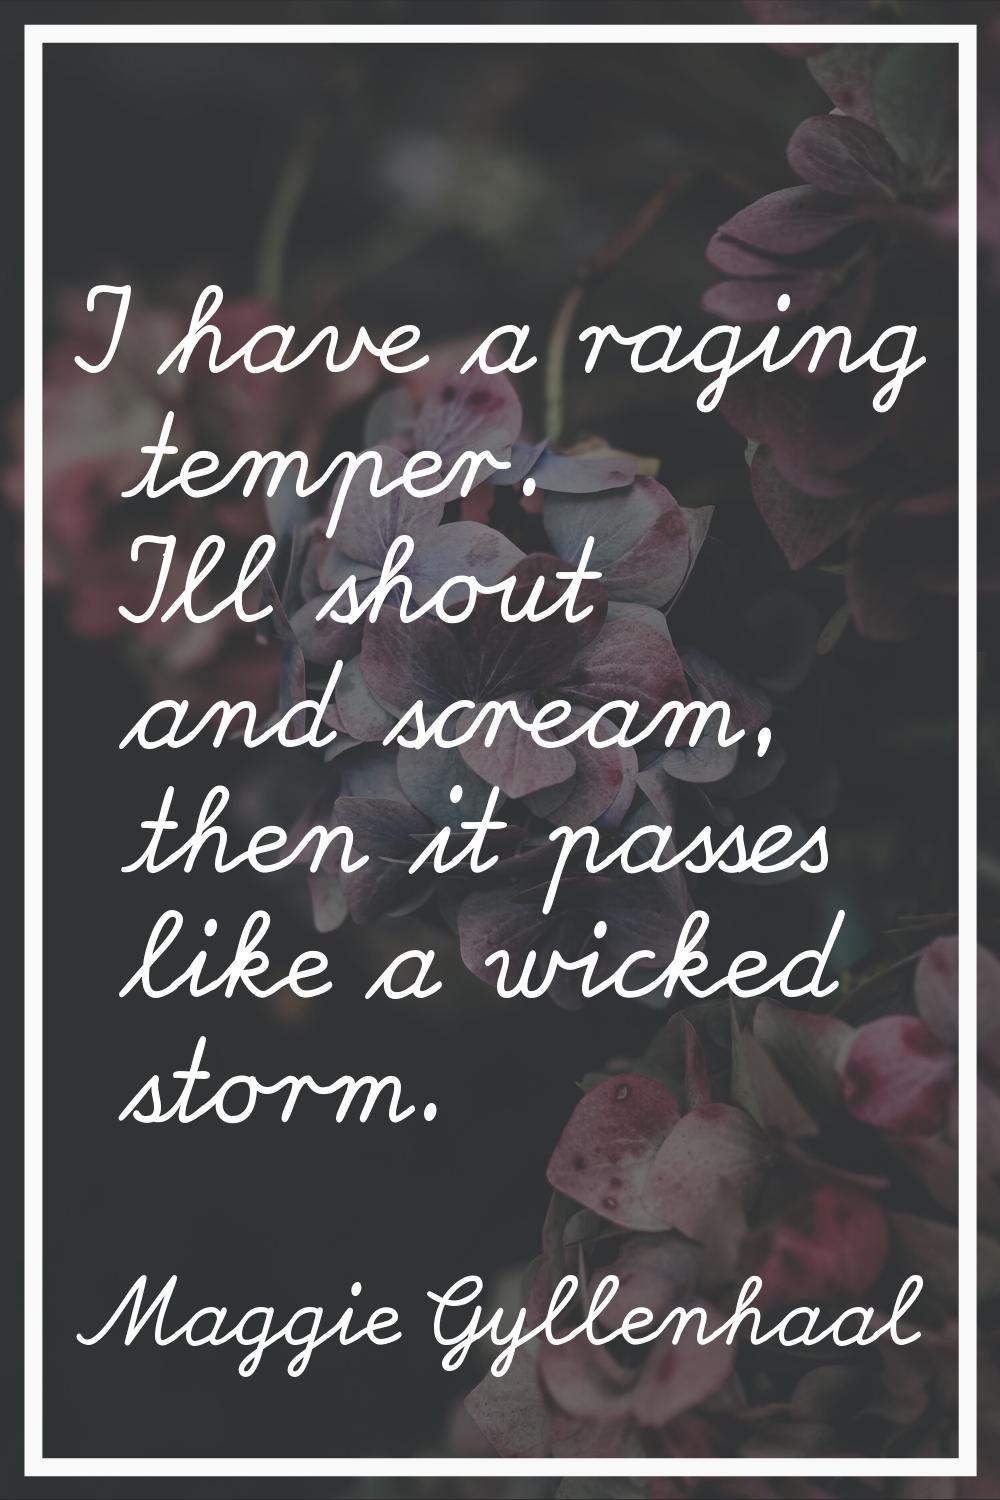 I have a raging temper. I'll shout and scream, then it passes like a wicked storm.